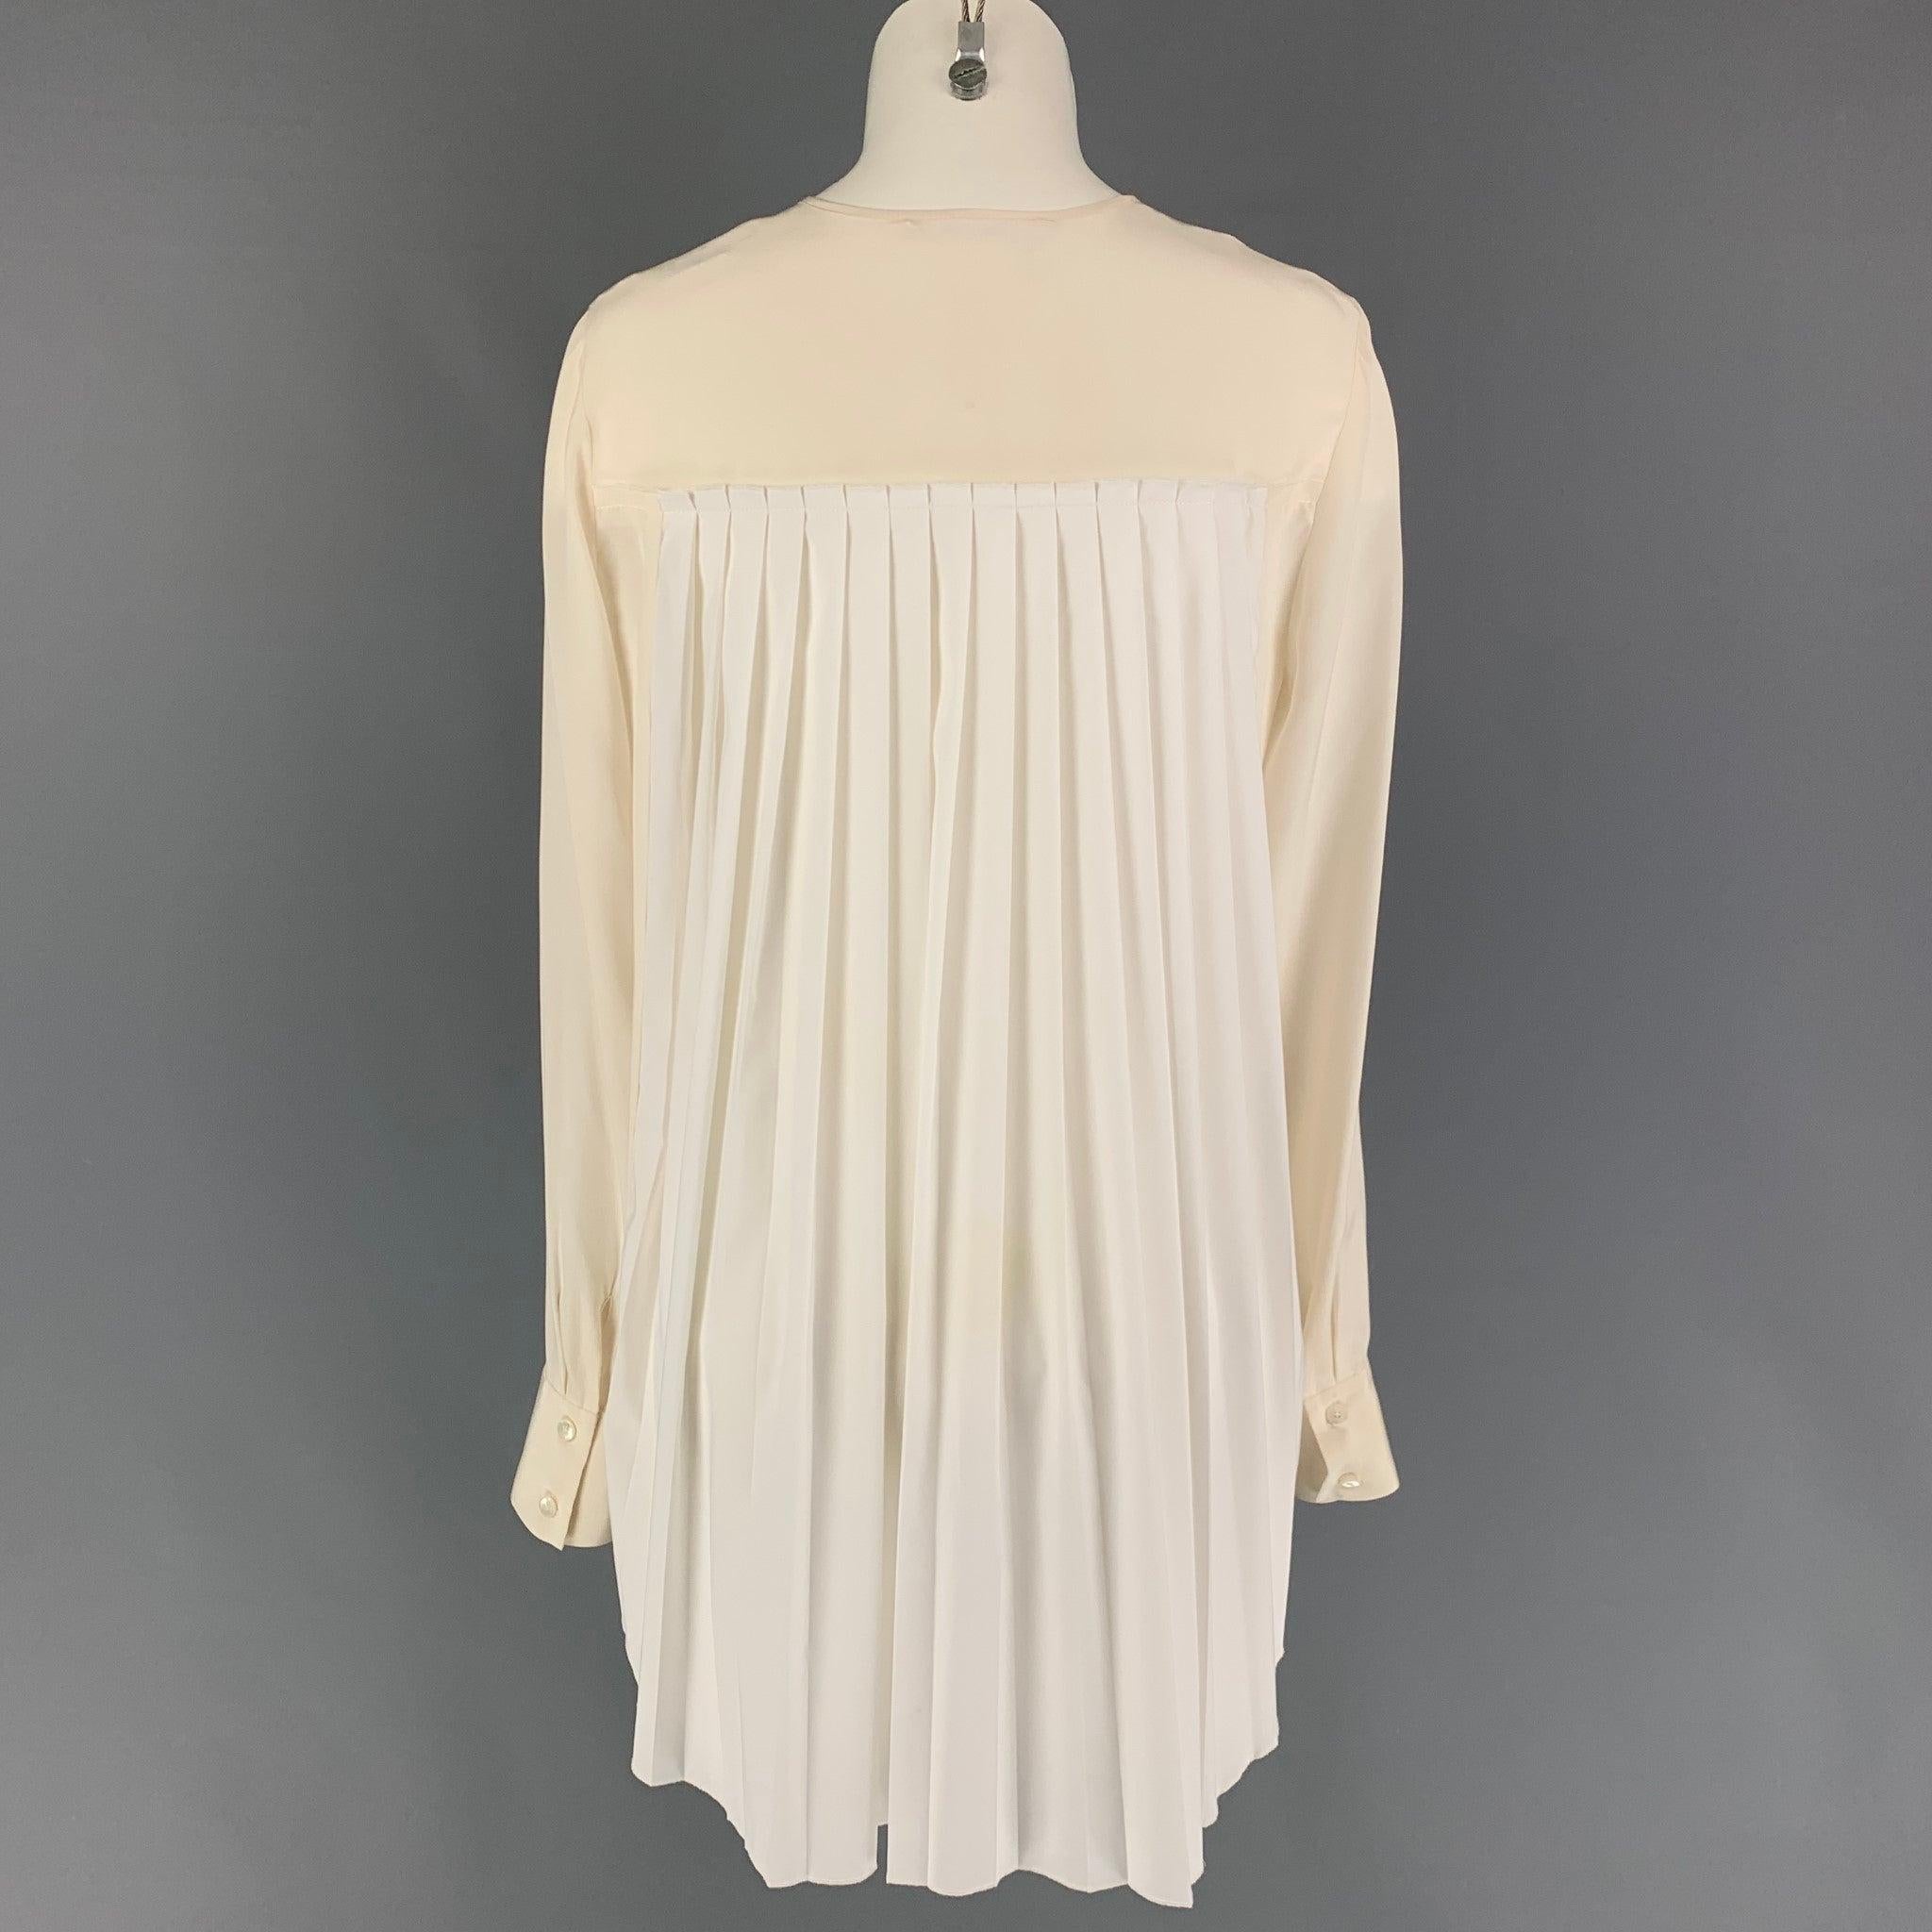 DEREK LAM Size 4 Cream White Silk Pleated Long Sleeve Blouse In Good Condition For Sale In San Francisco, CA